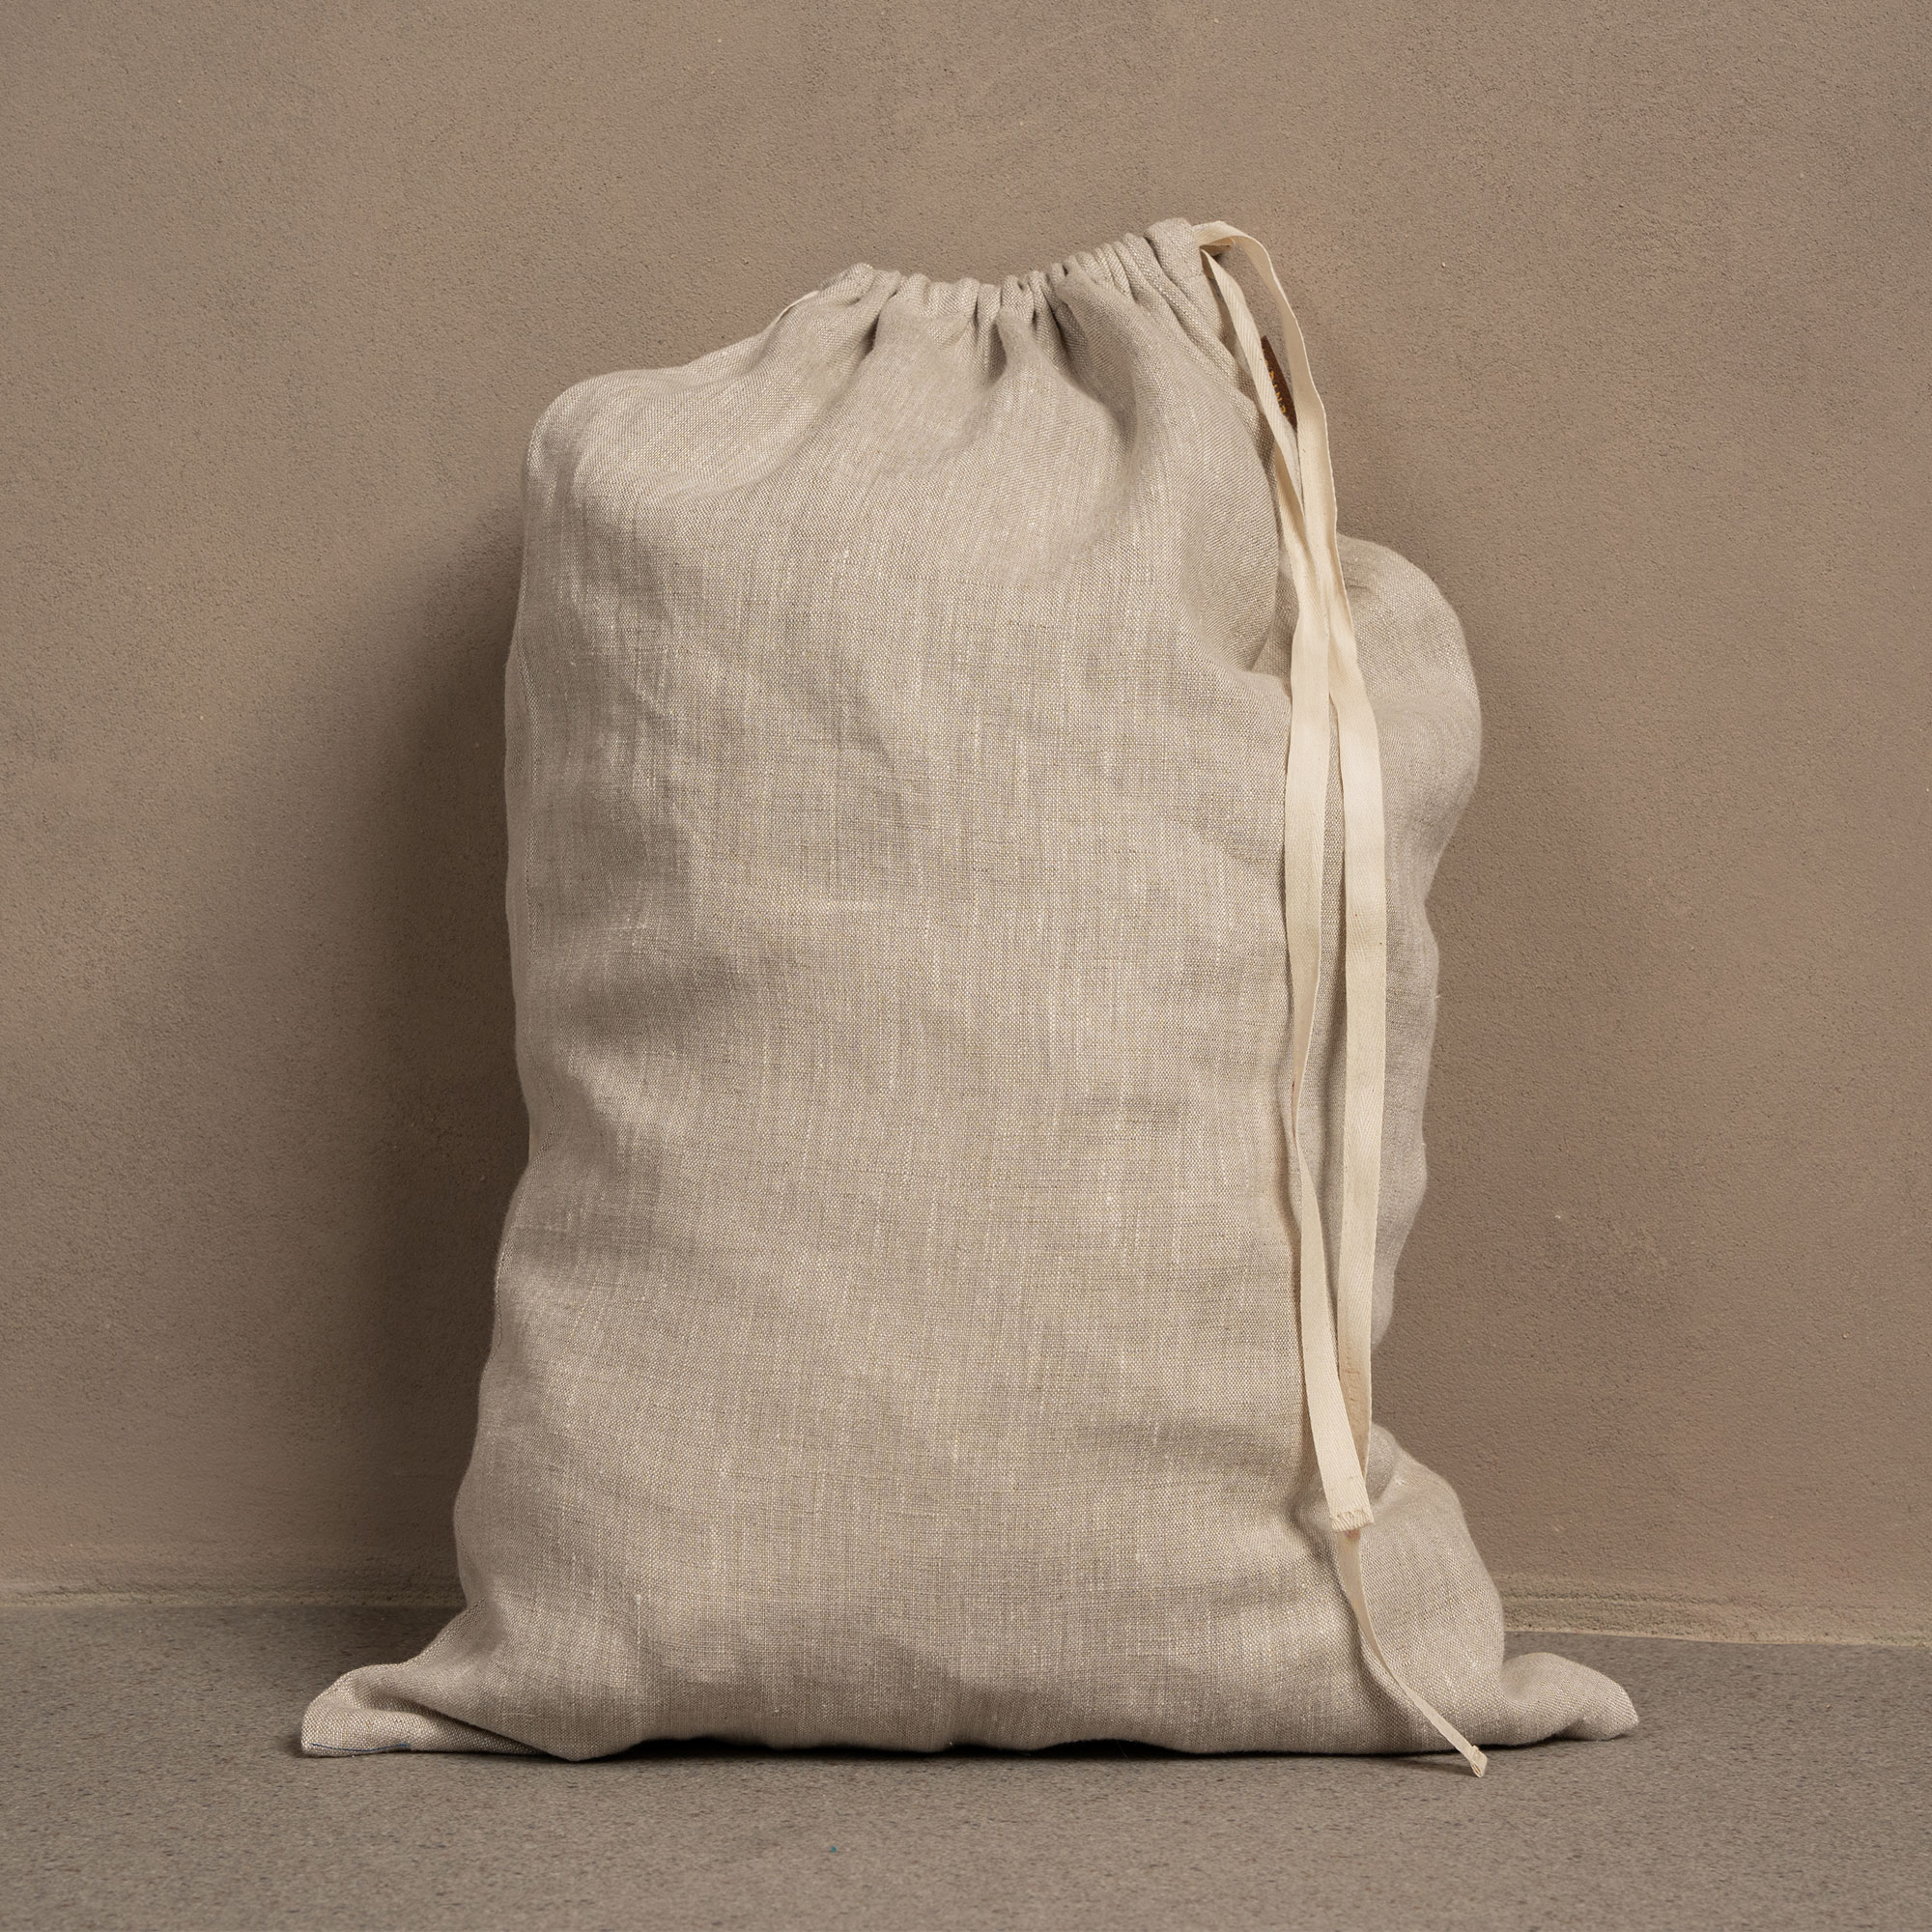 Linen laundry bag with white drawstrings